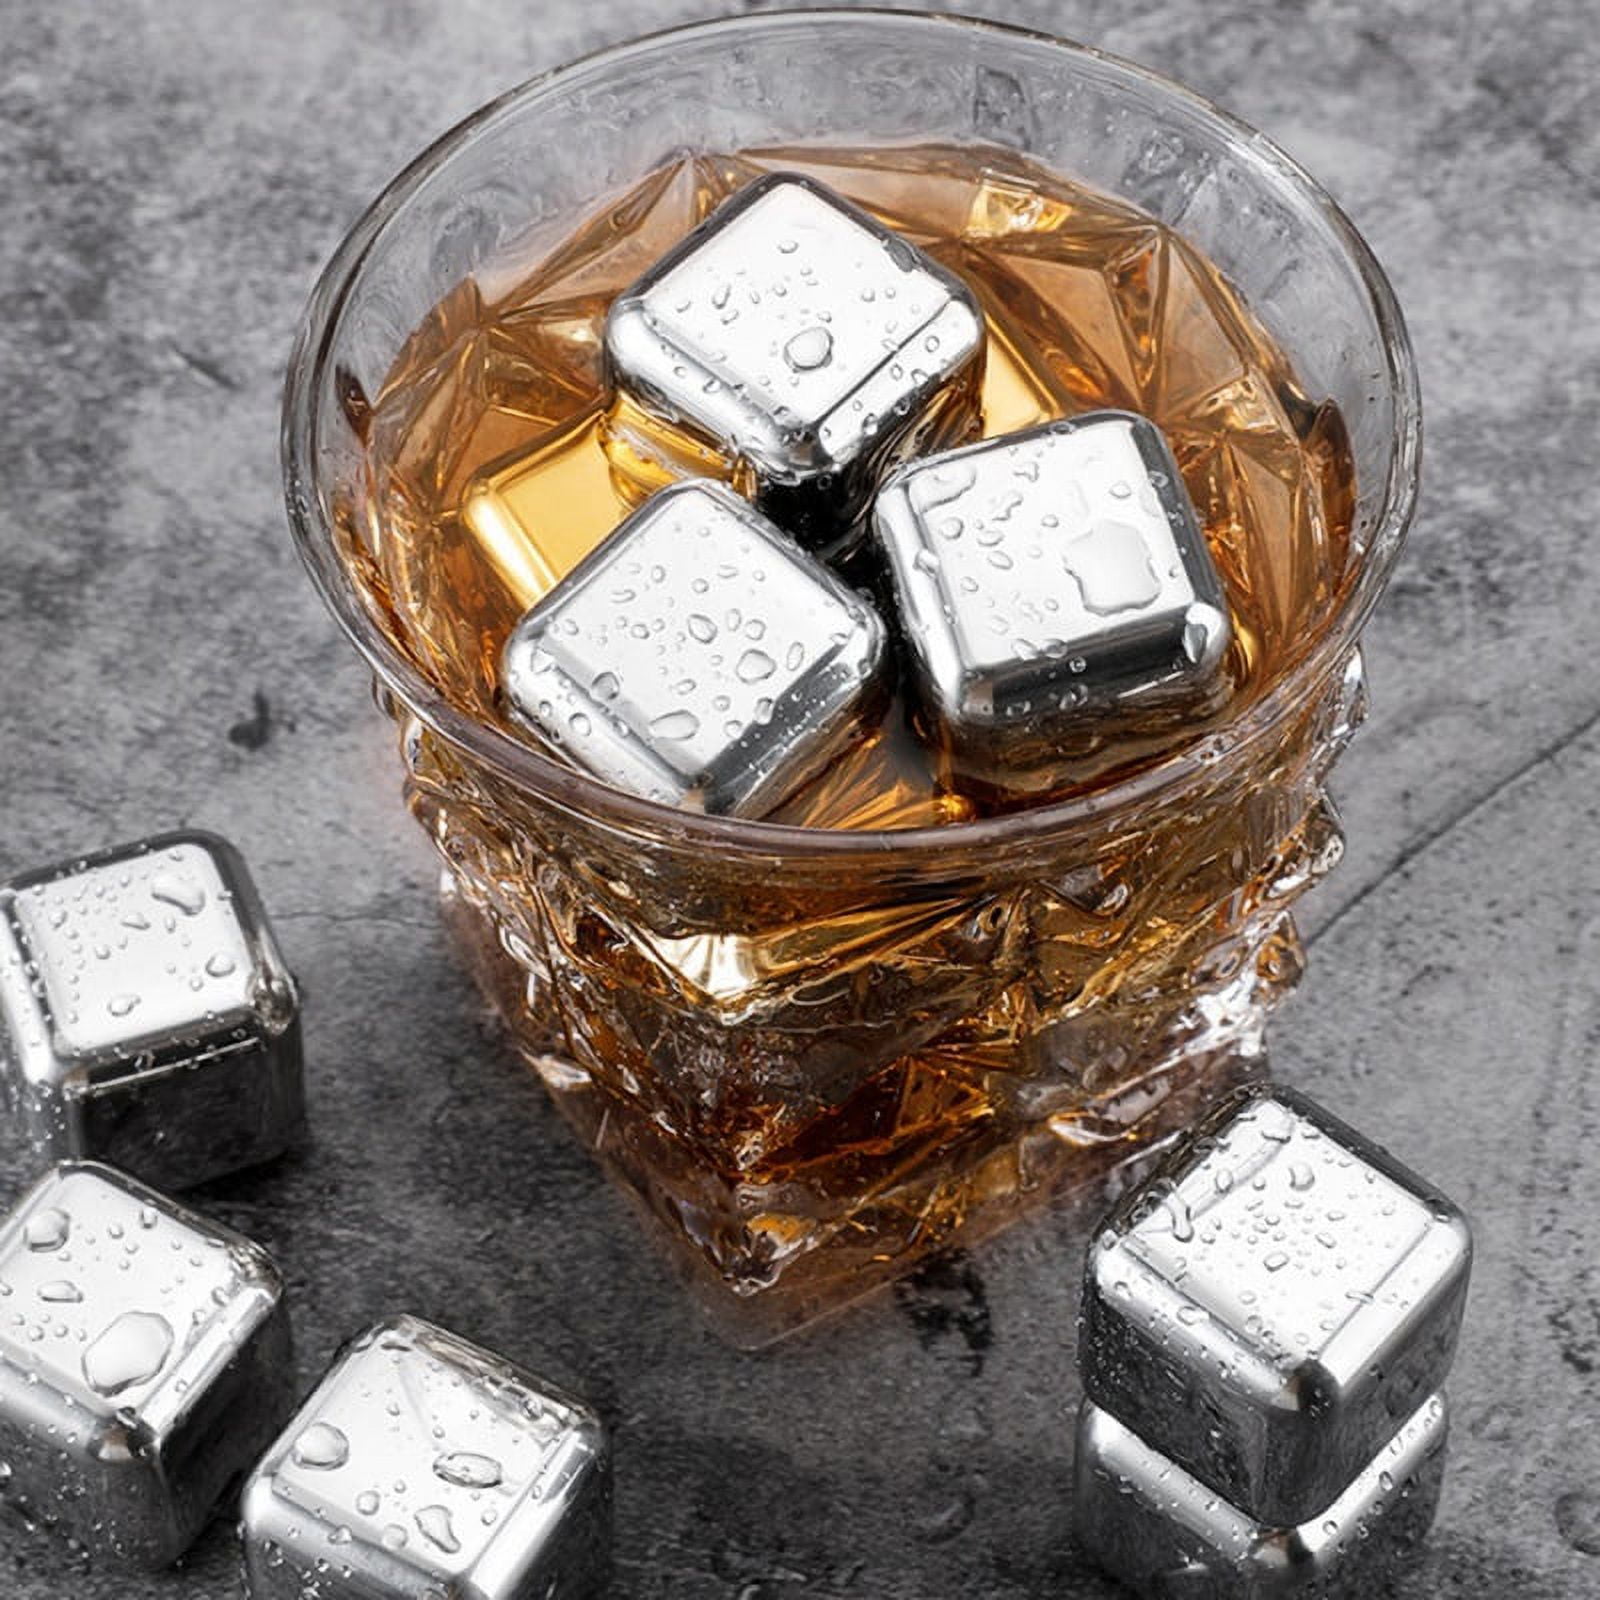  4Pcs Round Whiskey Stones Spherical Reusable Stainless Steel Ice  Cubes Golf Ball Whiskey Stones Balls Metal Ice Balls Scotch Gift Set for  Red Wine Scotch Whiskey Bar Beer (25mm Round Shape)